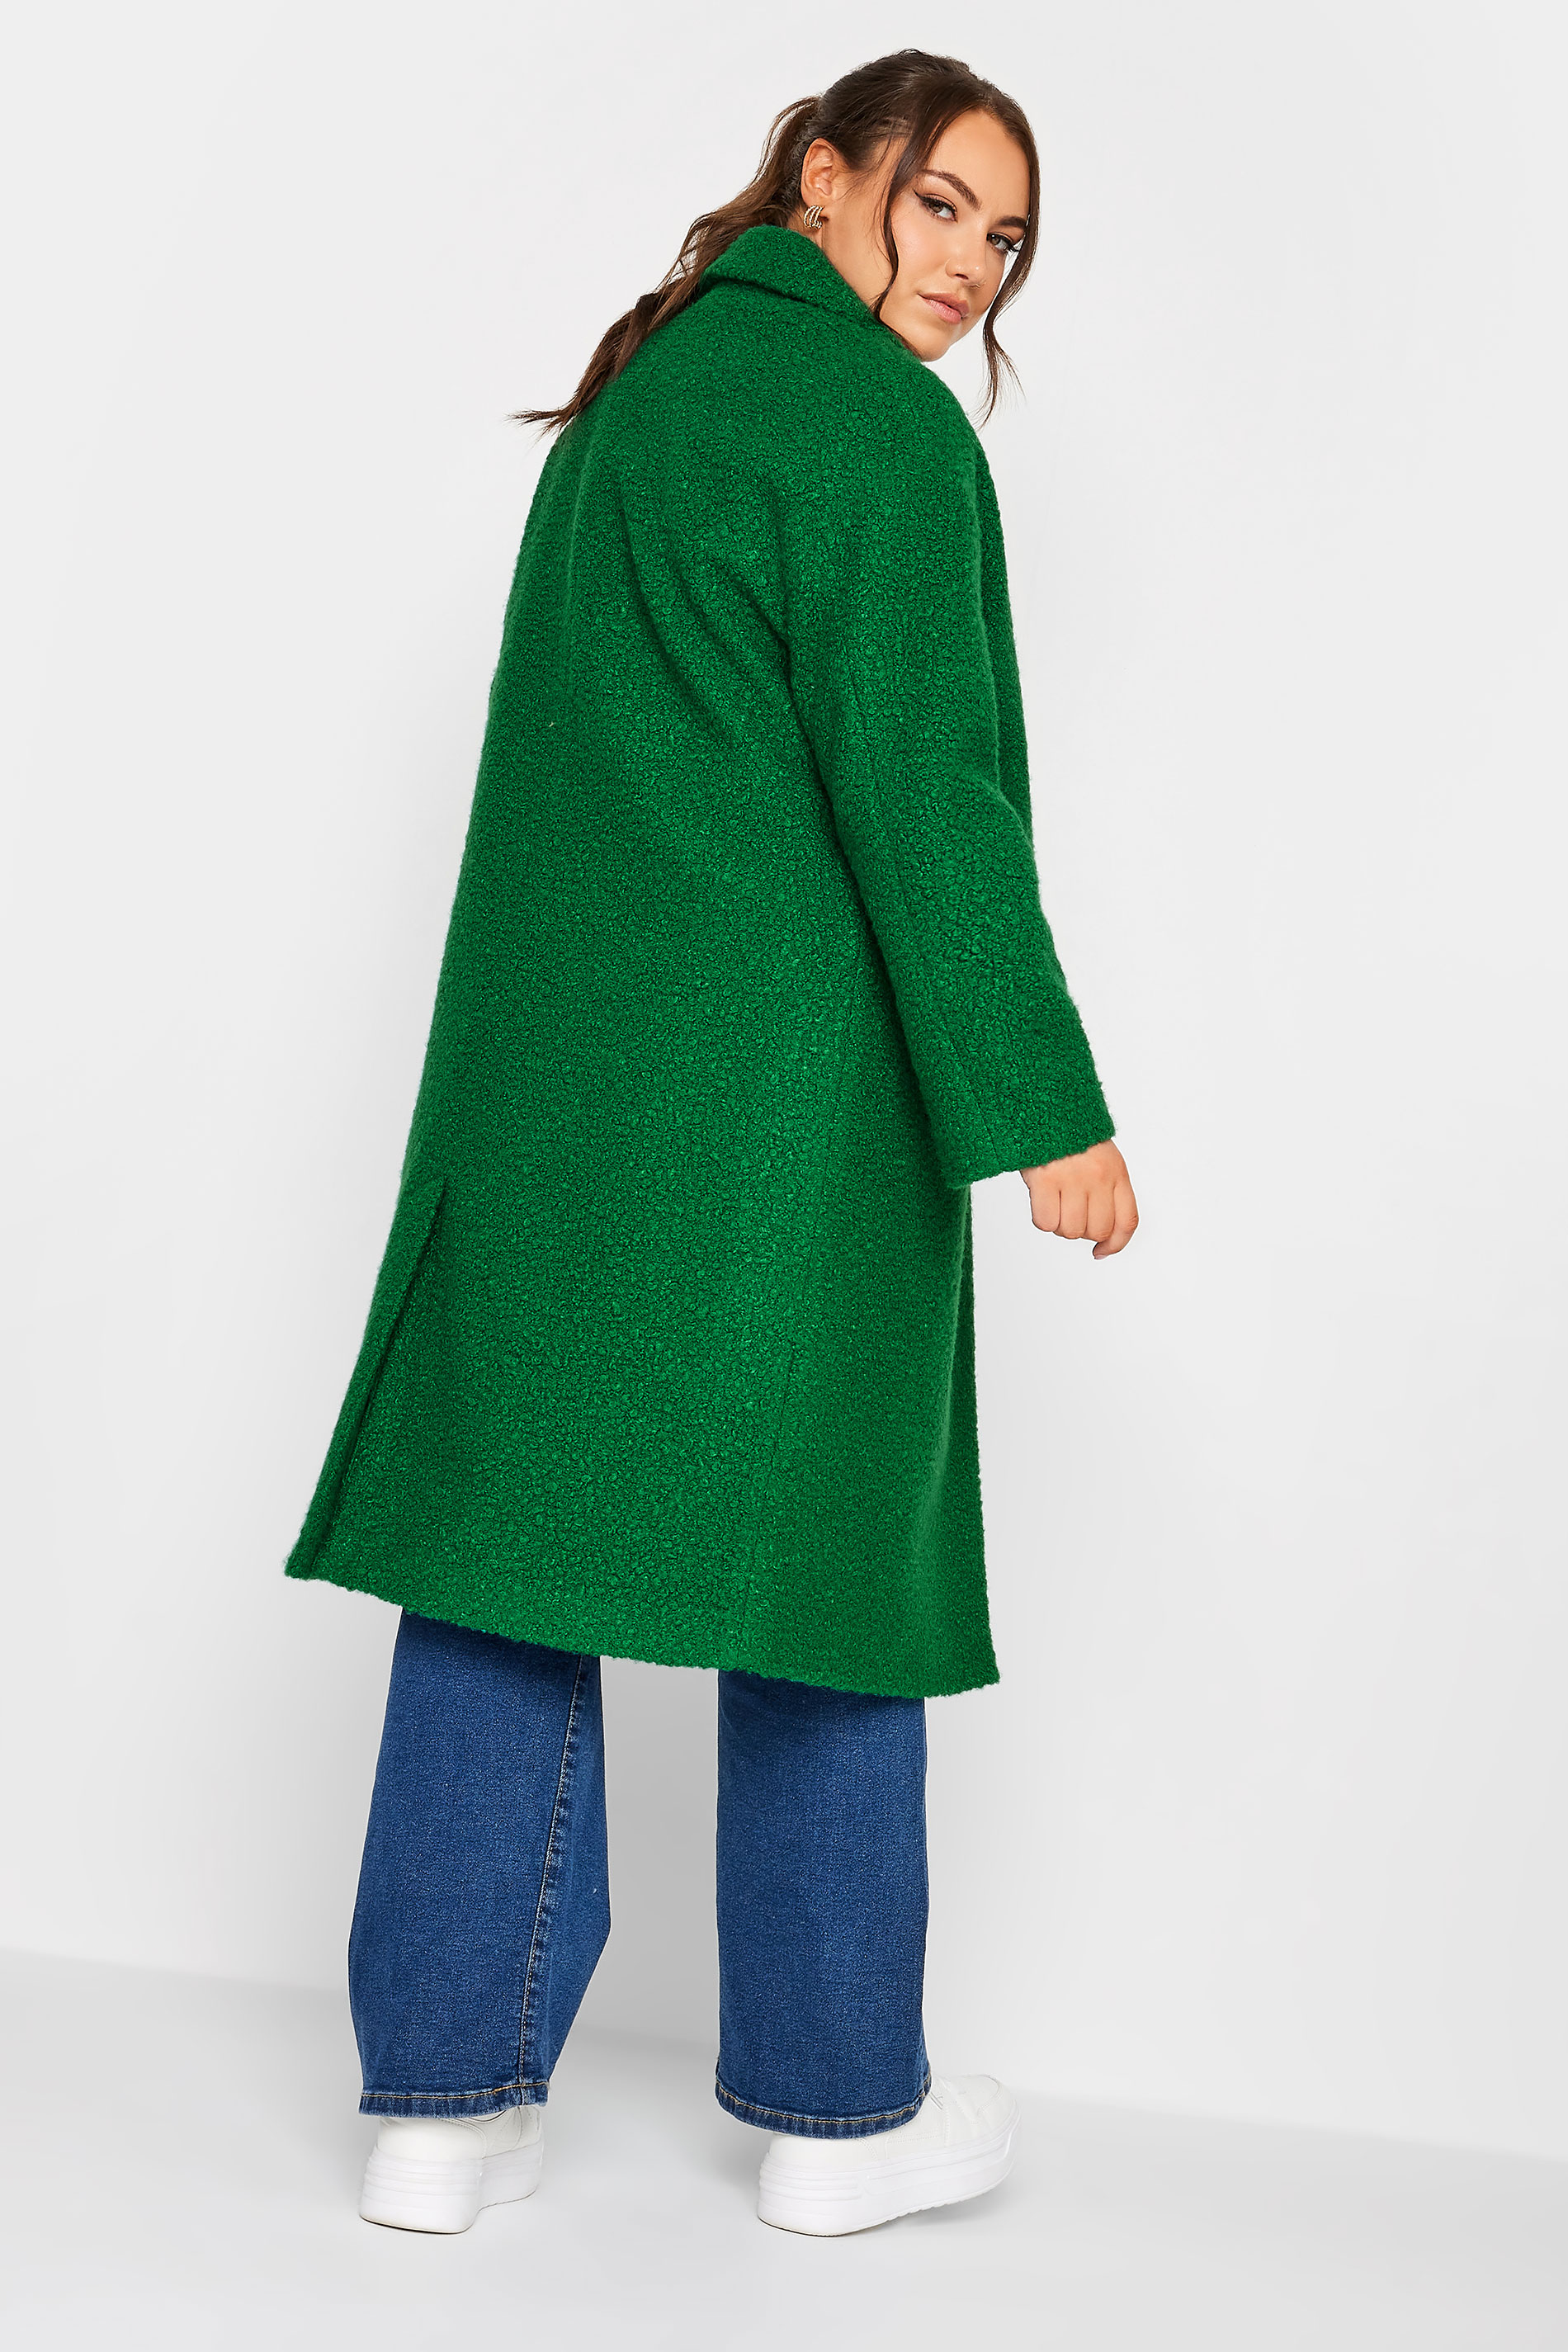 YOURS Plus Size Green Boucle Coat | Yours Clothing 3